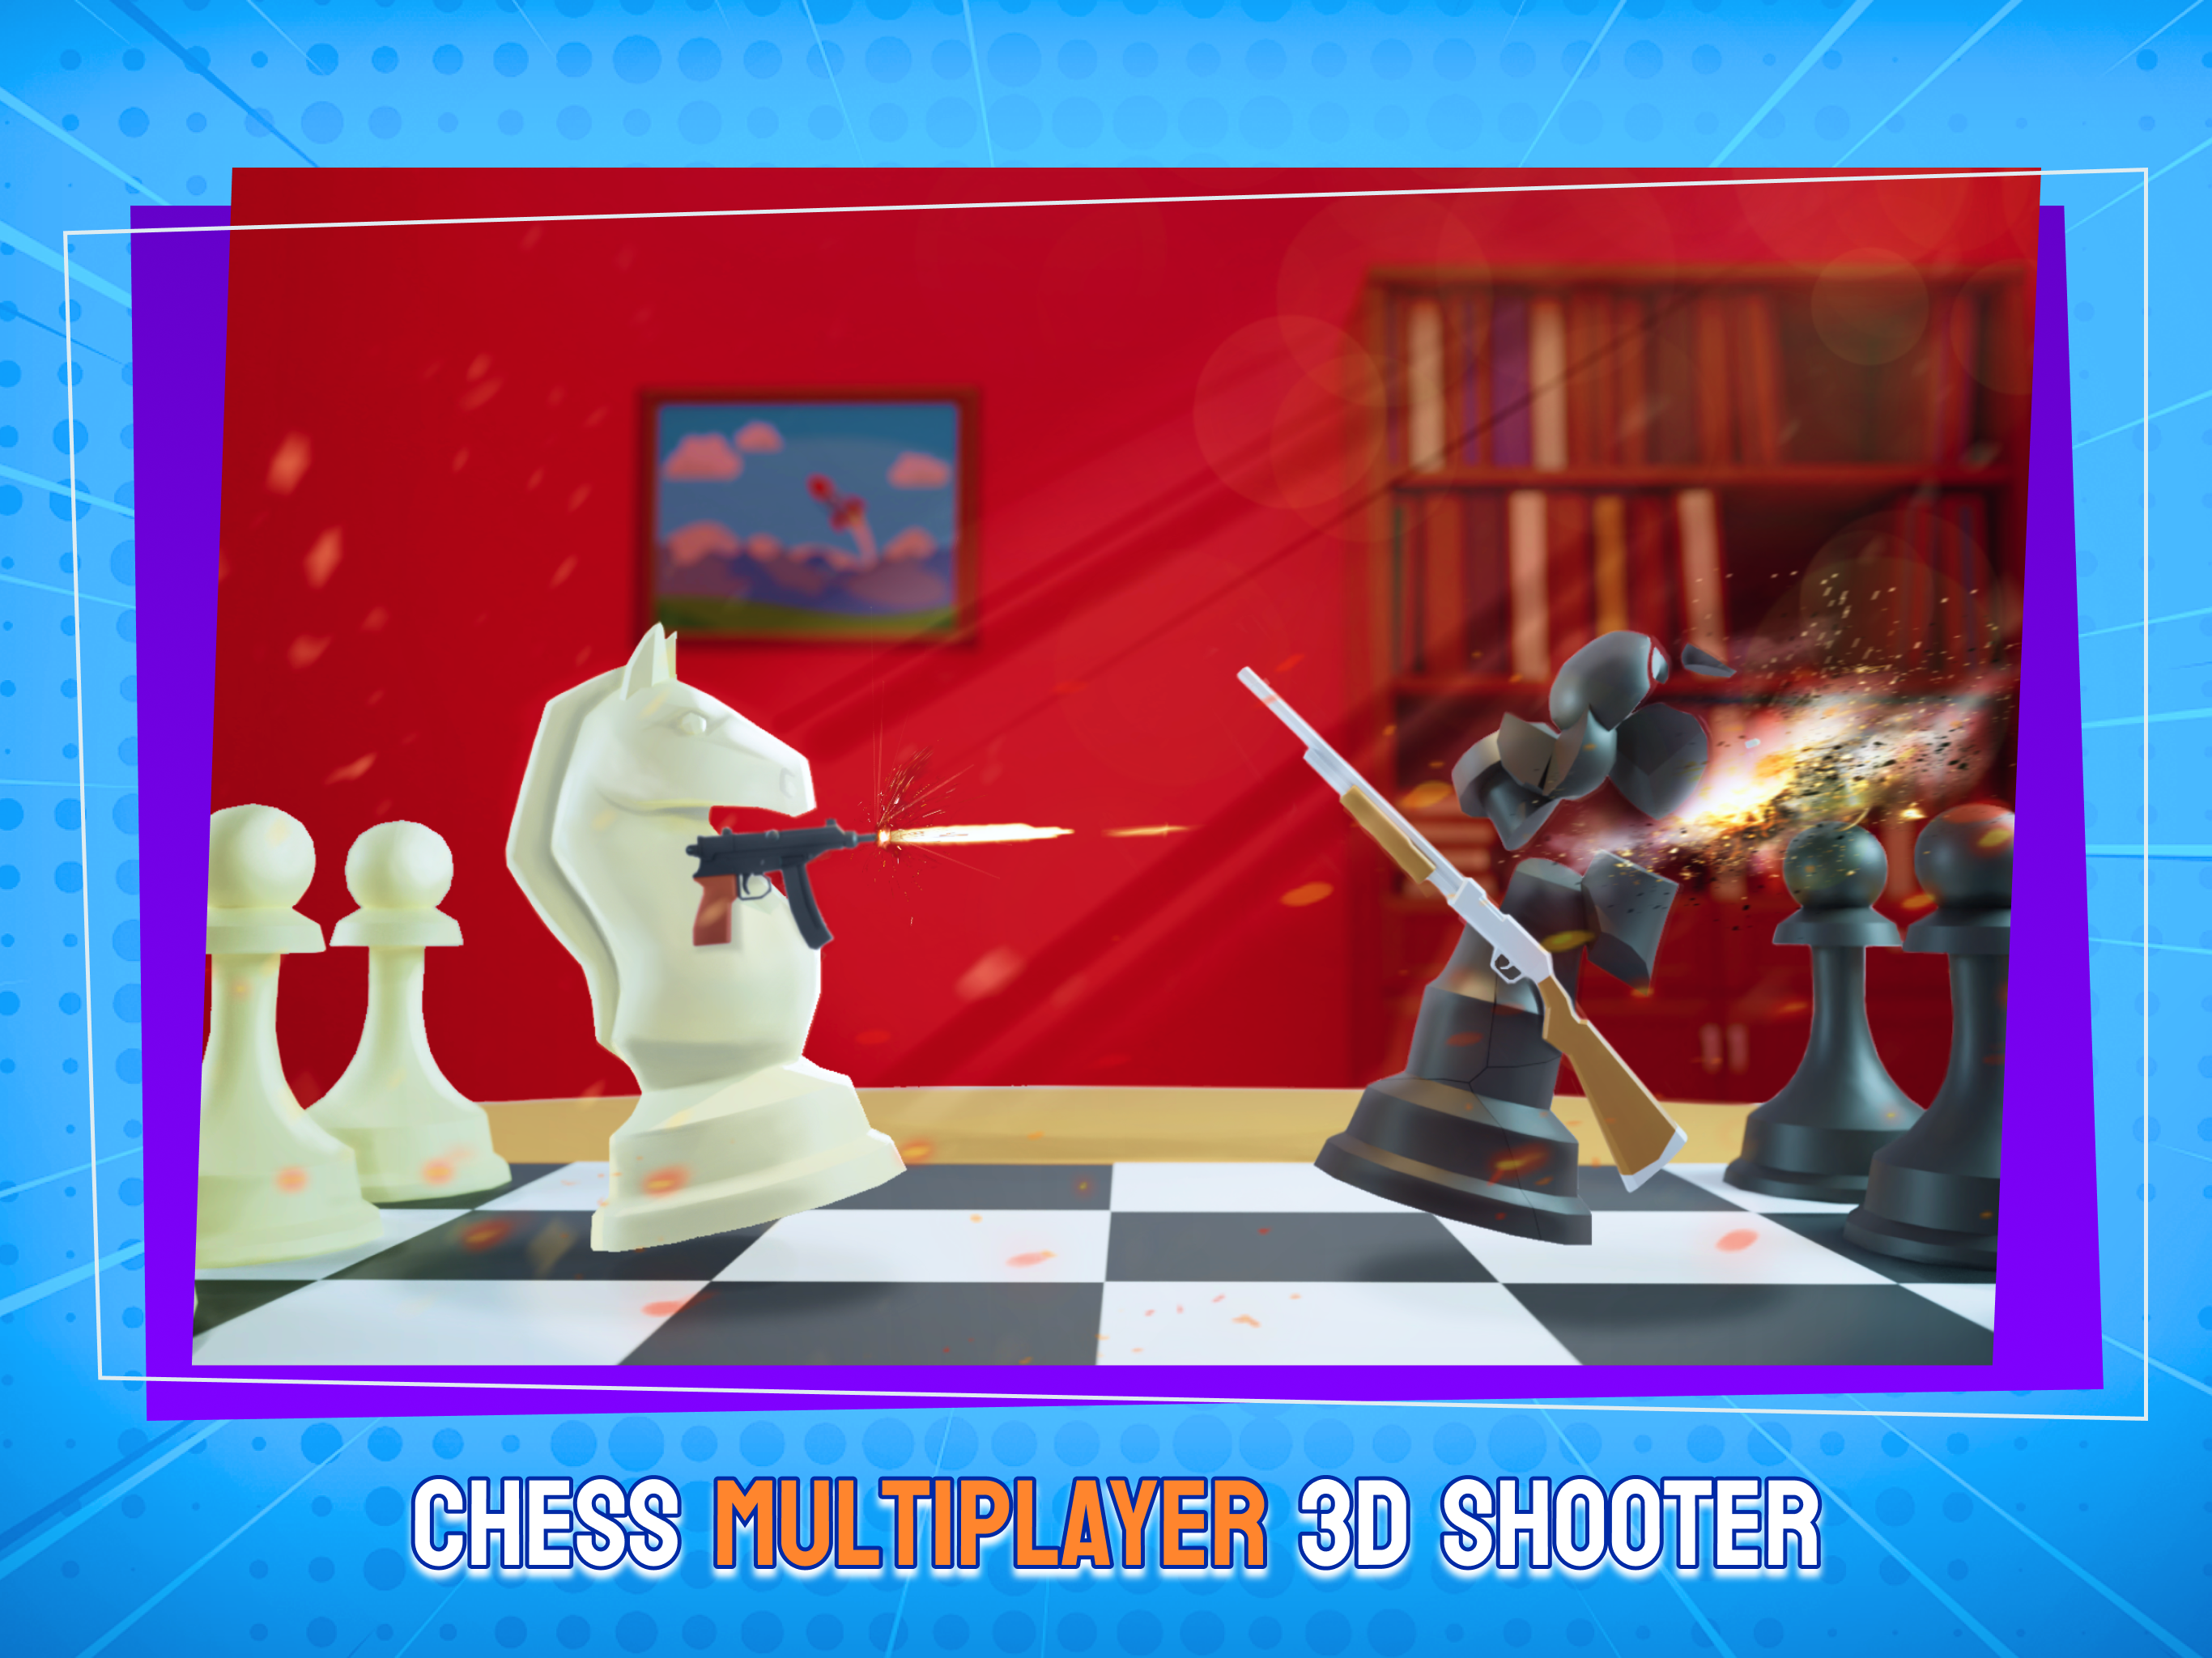 FPS Chess free download